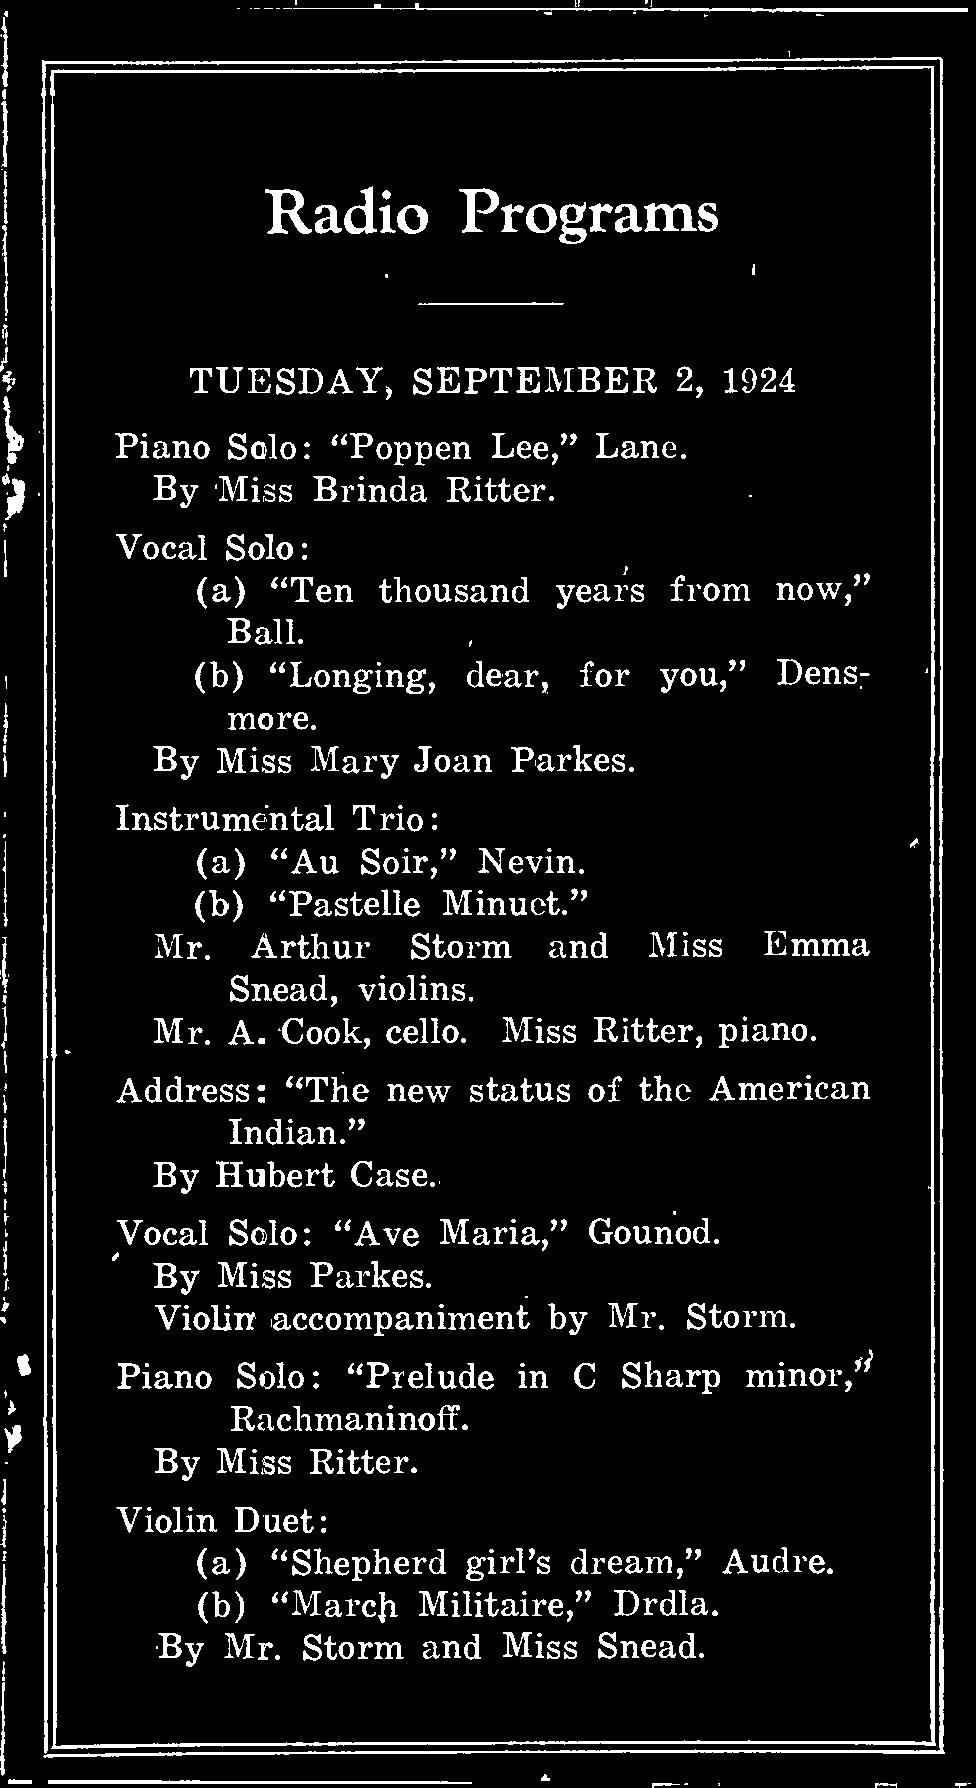 Arthur Storm and Miss Emma Snead, violins. Mr. A. Cook, cello. Miss Ritter, piano. Address: "The new status of the American Indian." By Hubert Case.